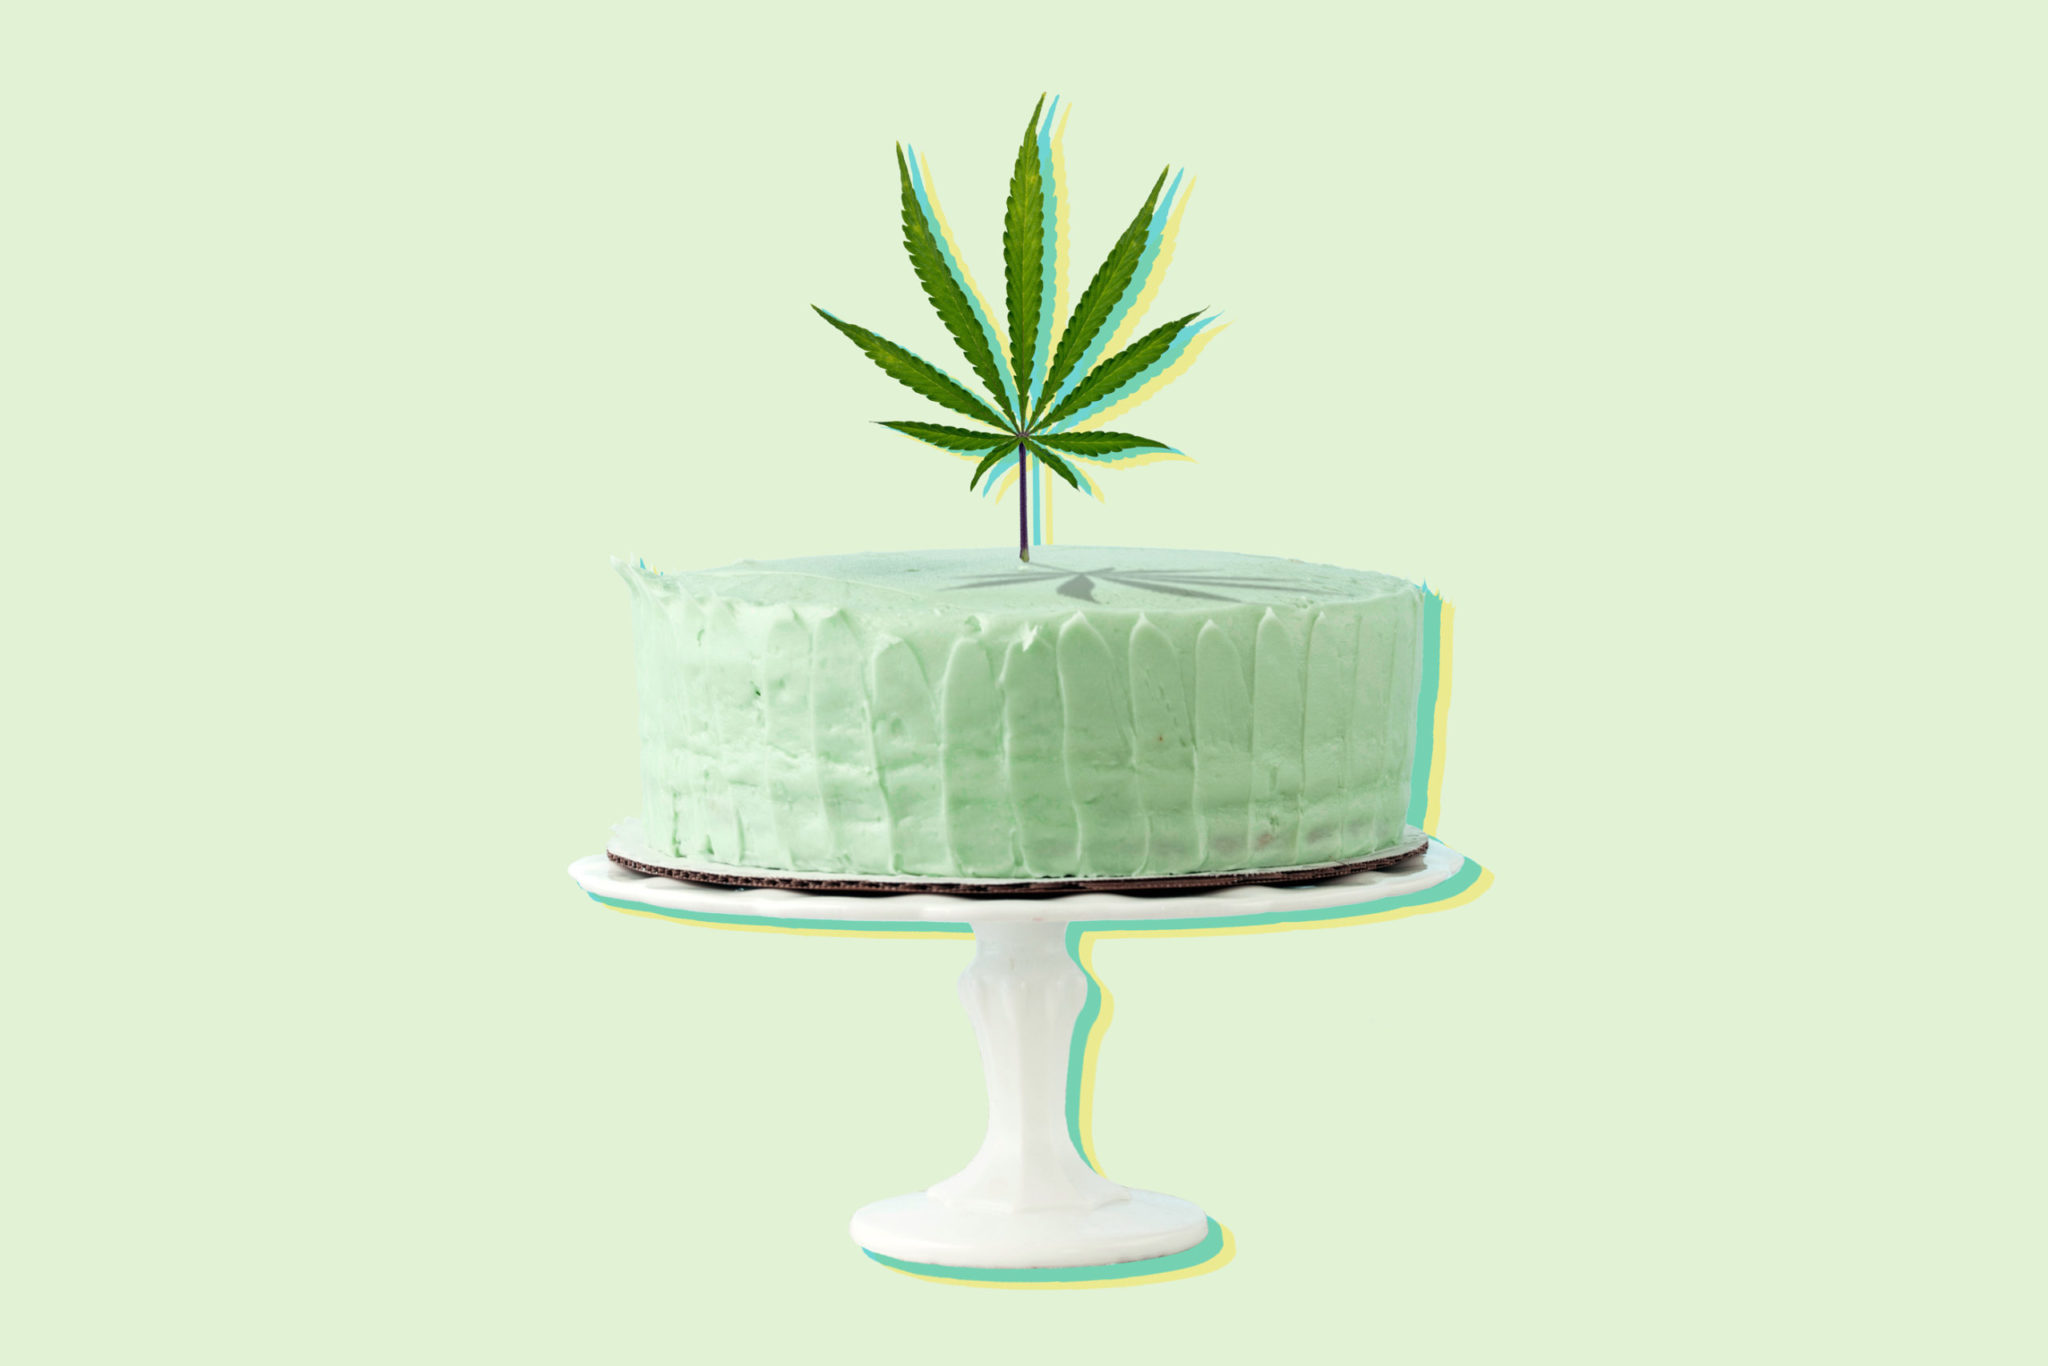 THE ROUND UP: MA ADULT-USE CANNABIS INDUSTRY CELEBRATES ONE-YEAR ANNIVERSARY